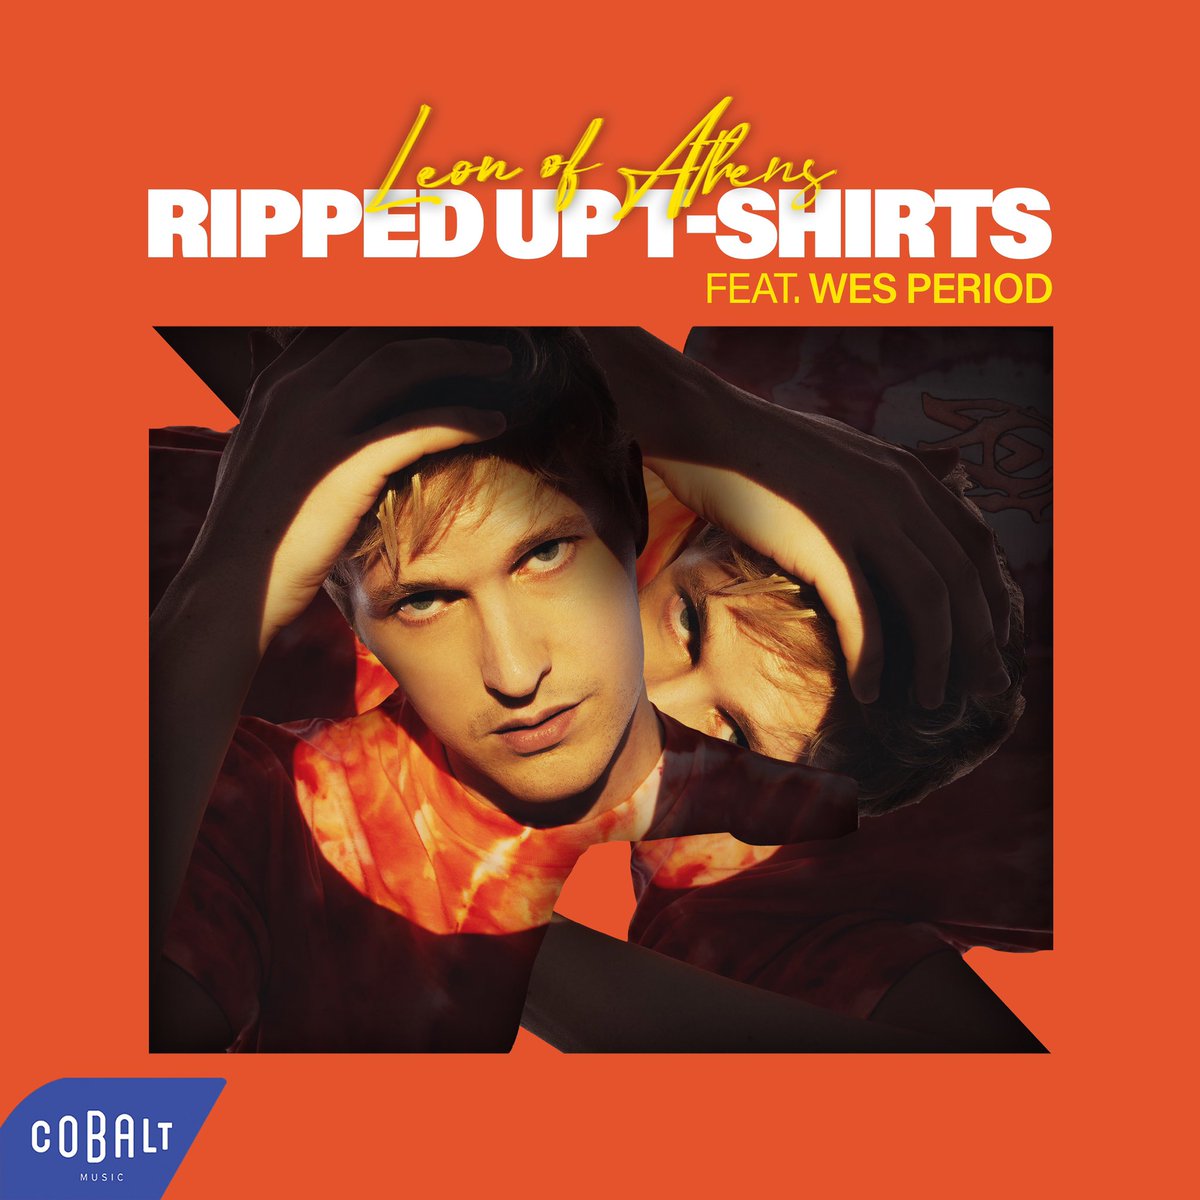 Leon of Athens featuring Wes Period — Ripped Up T-Shirts cover artwork